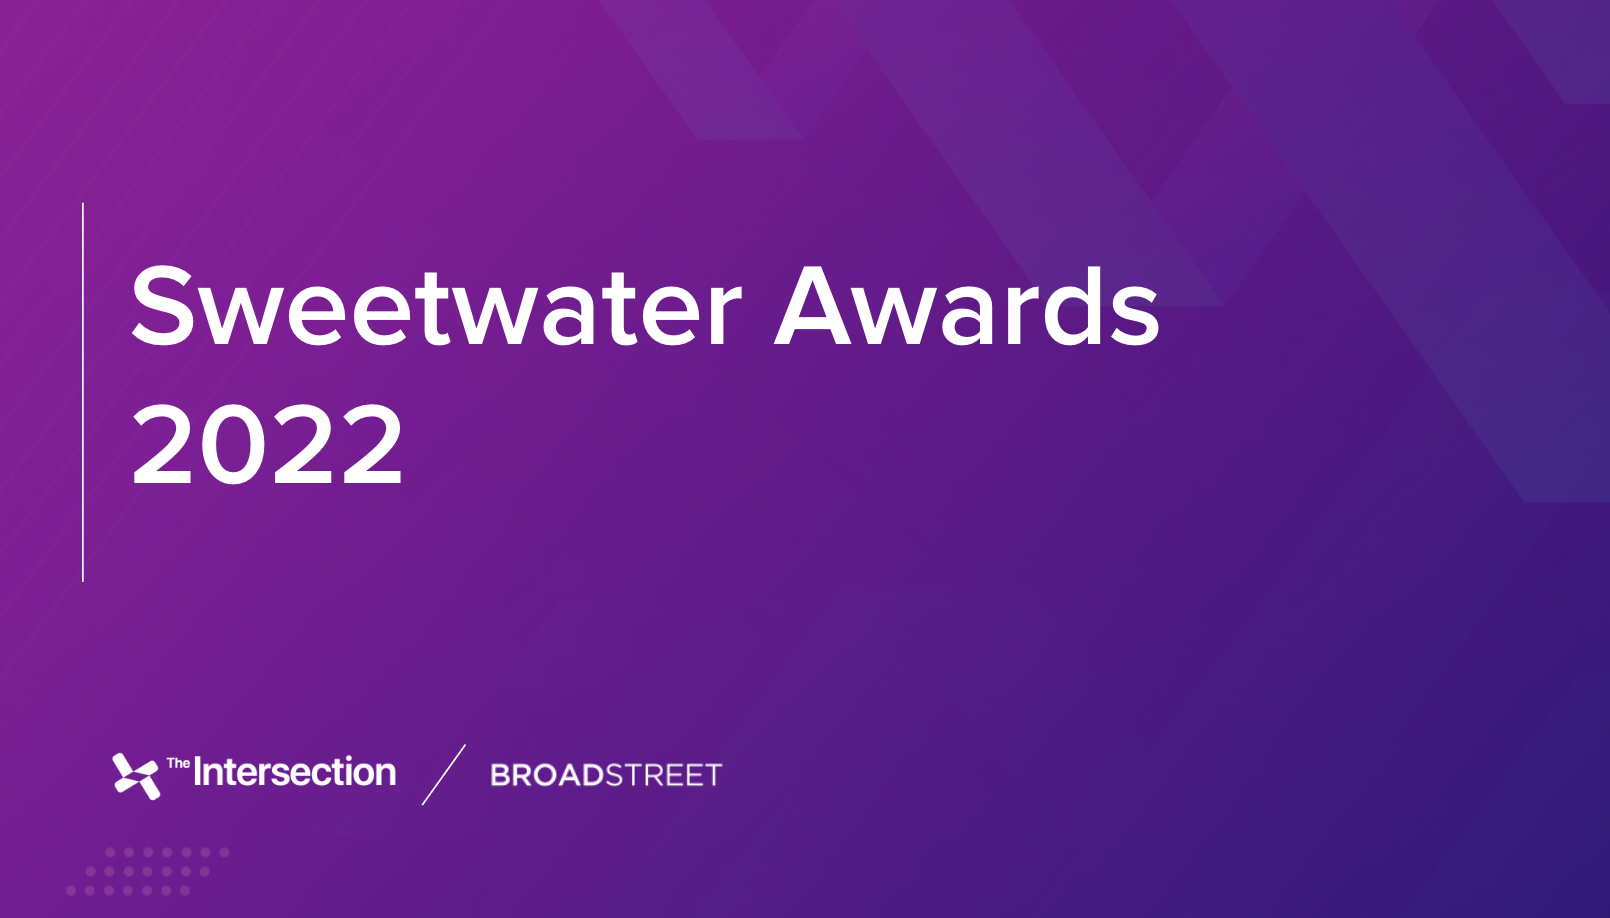 Sweetwater Awards 2022